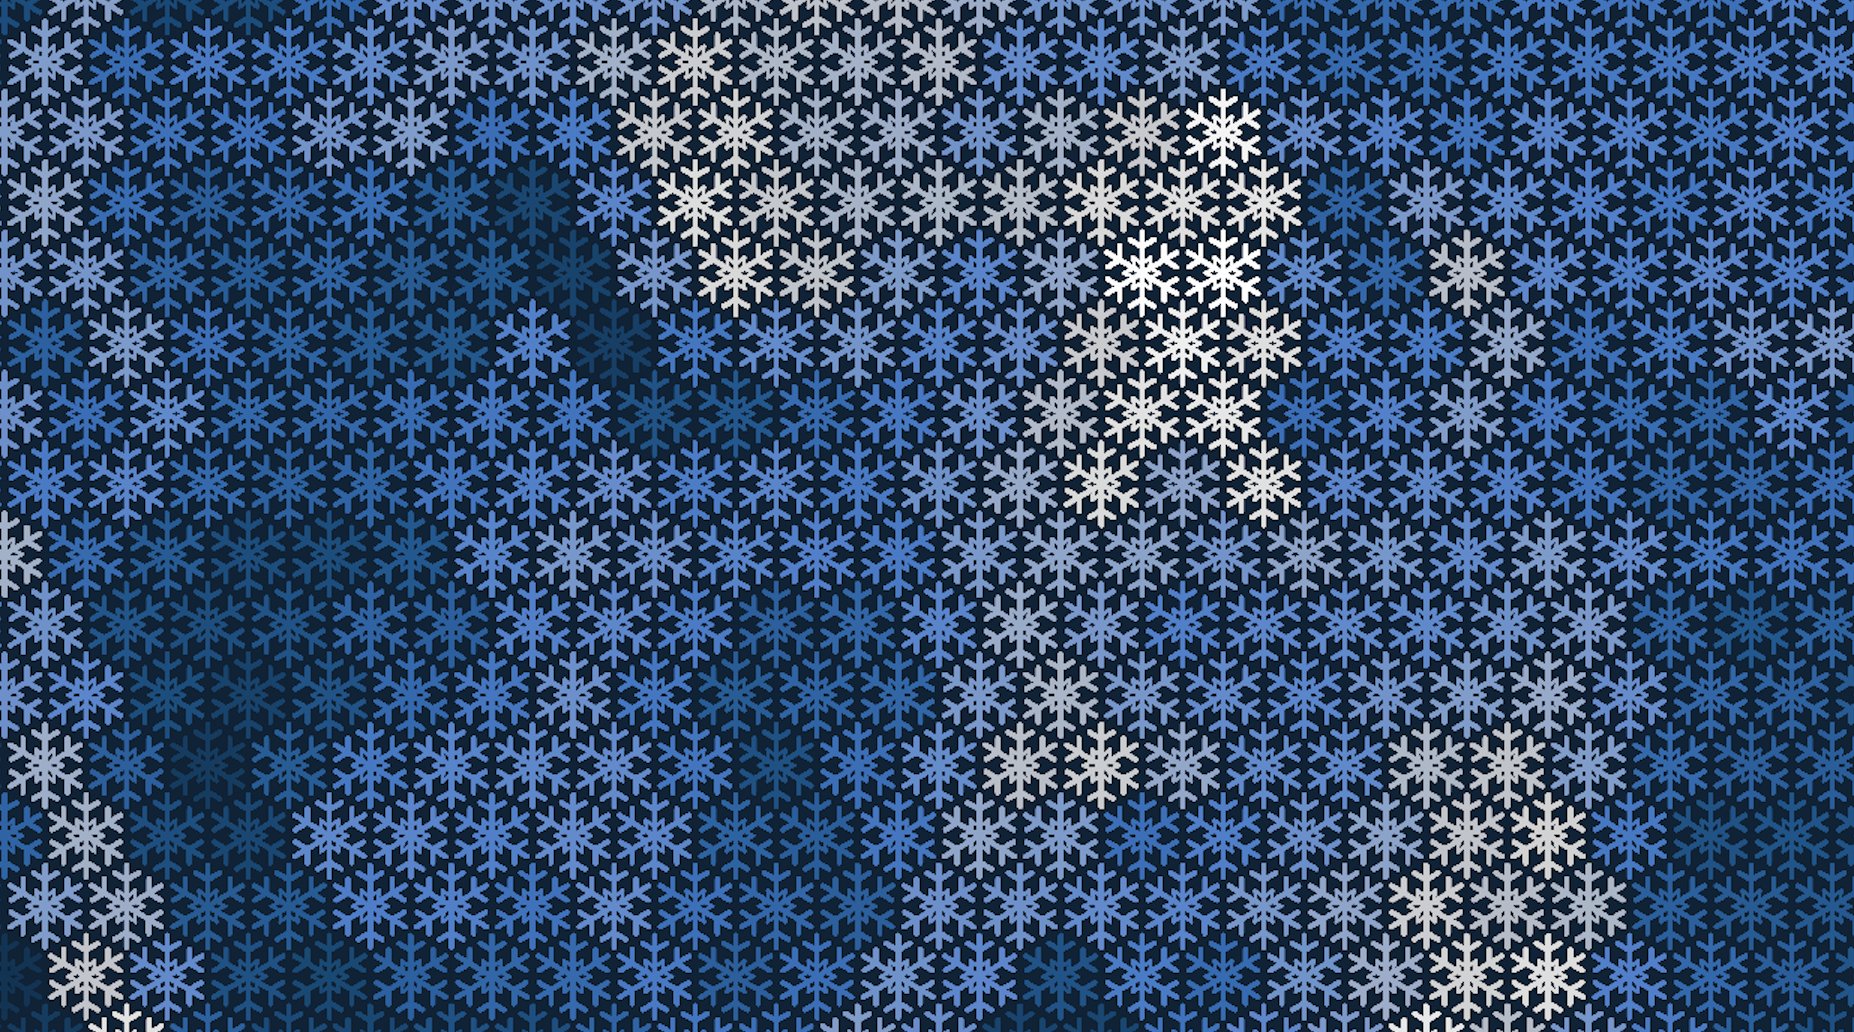 A zoomed in view of the snowflake hex pattern in the west. Each snowflake is identical and fits within a hexagon, mosaicked together to create the map.